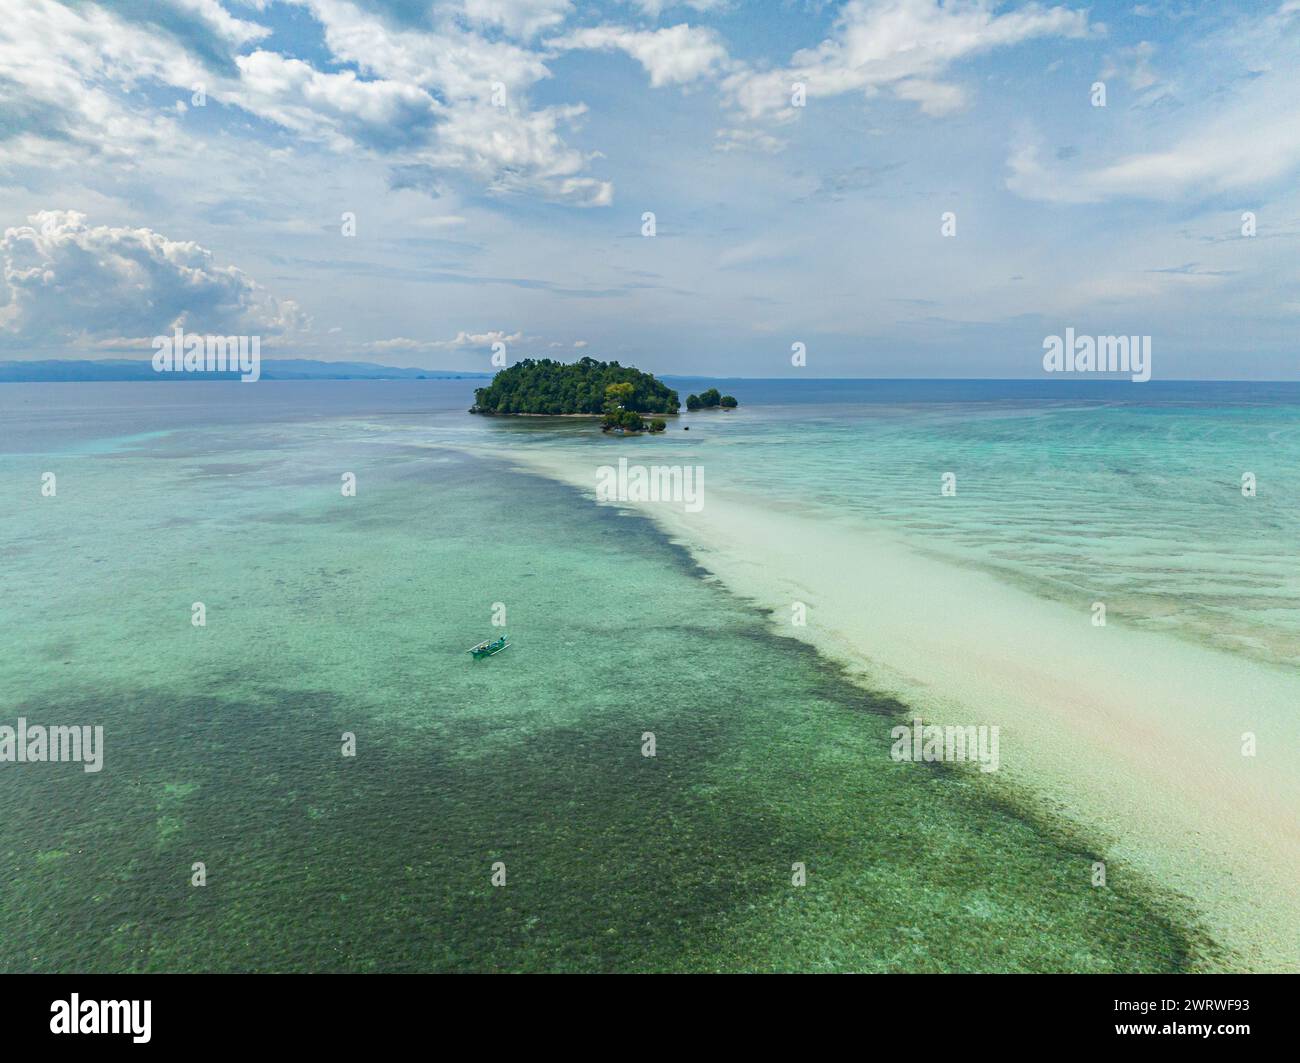 Tropical Islets surrounded by transparent azure water. Boats floating at white shoreline. Barobo, Surigao del Sur. Philippines. Stock Photo